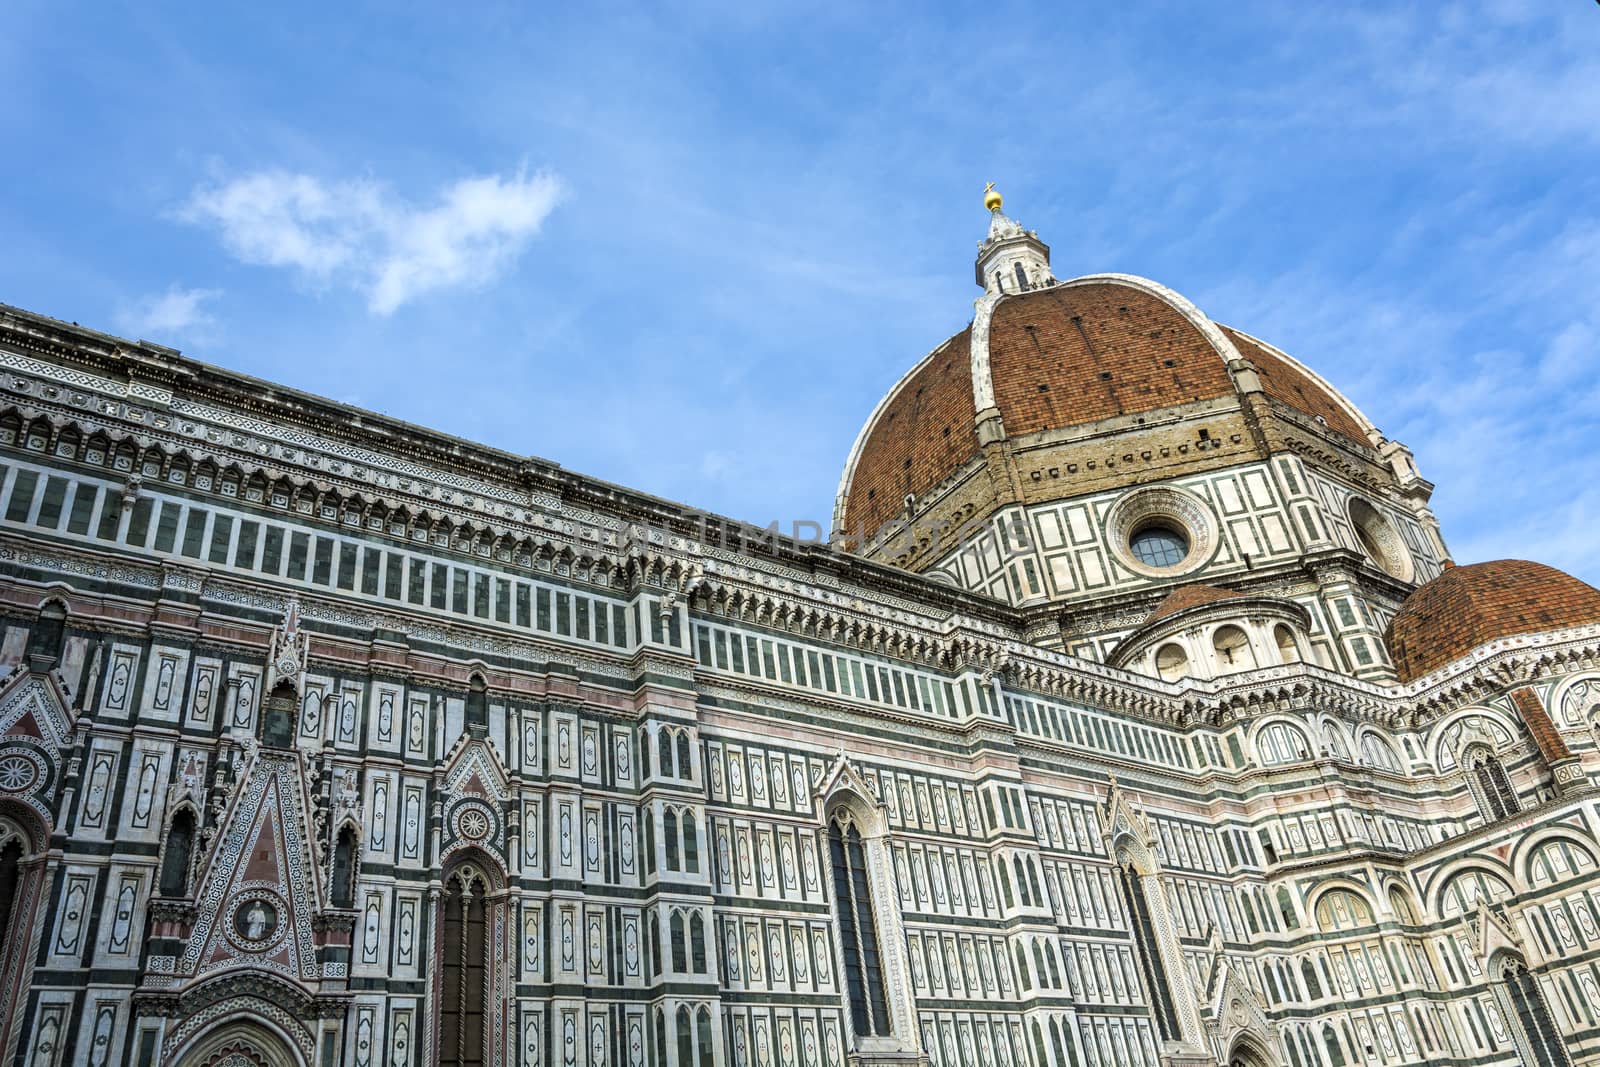  Il Duomo di Firenze, as it is ordinarily called, was begun in 1296 in the Gothic style with the design of Arnolfo di Cambio and completed structurally in 1436 with the dome engineered by Filippo Brunelleschi